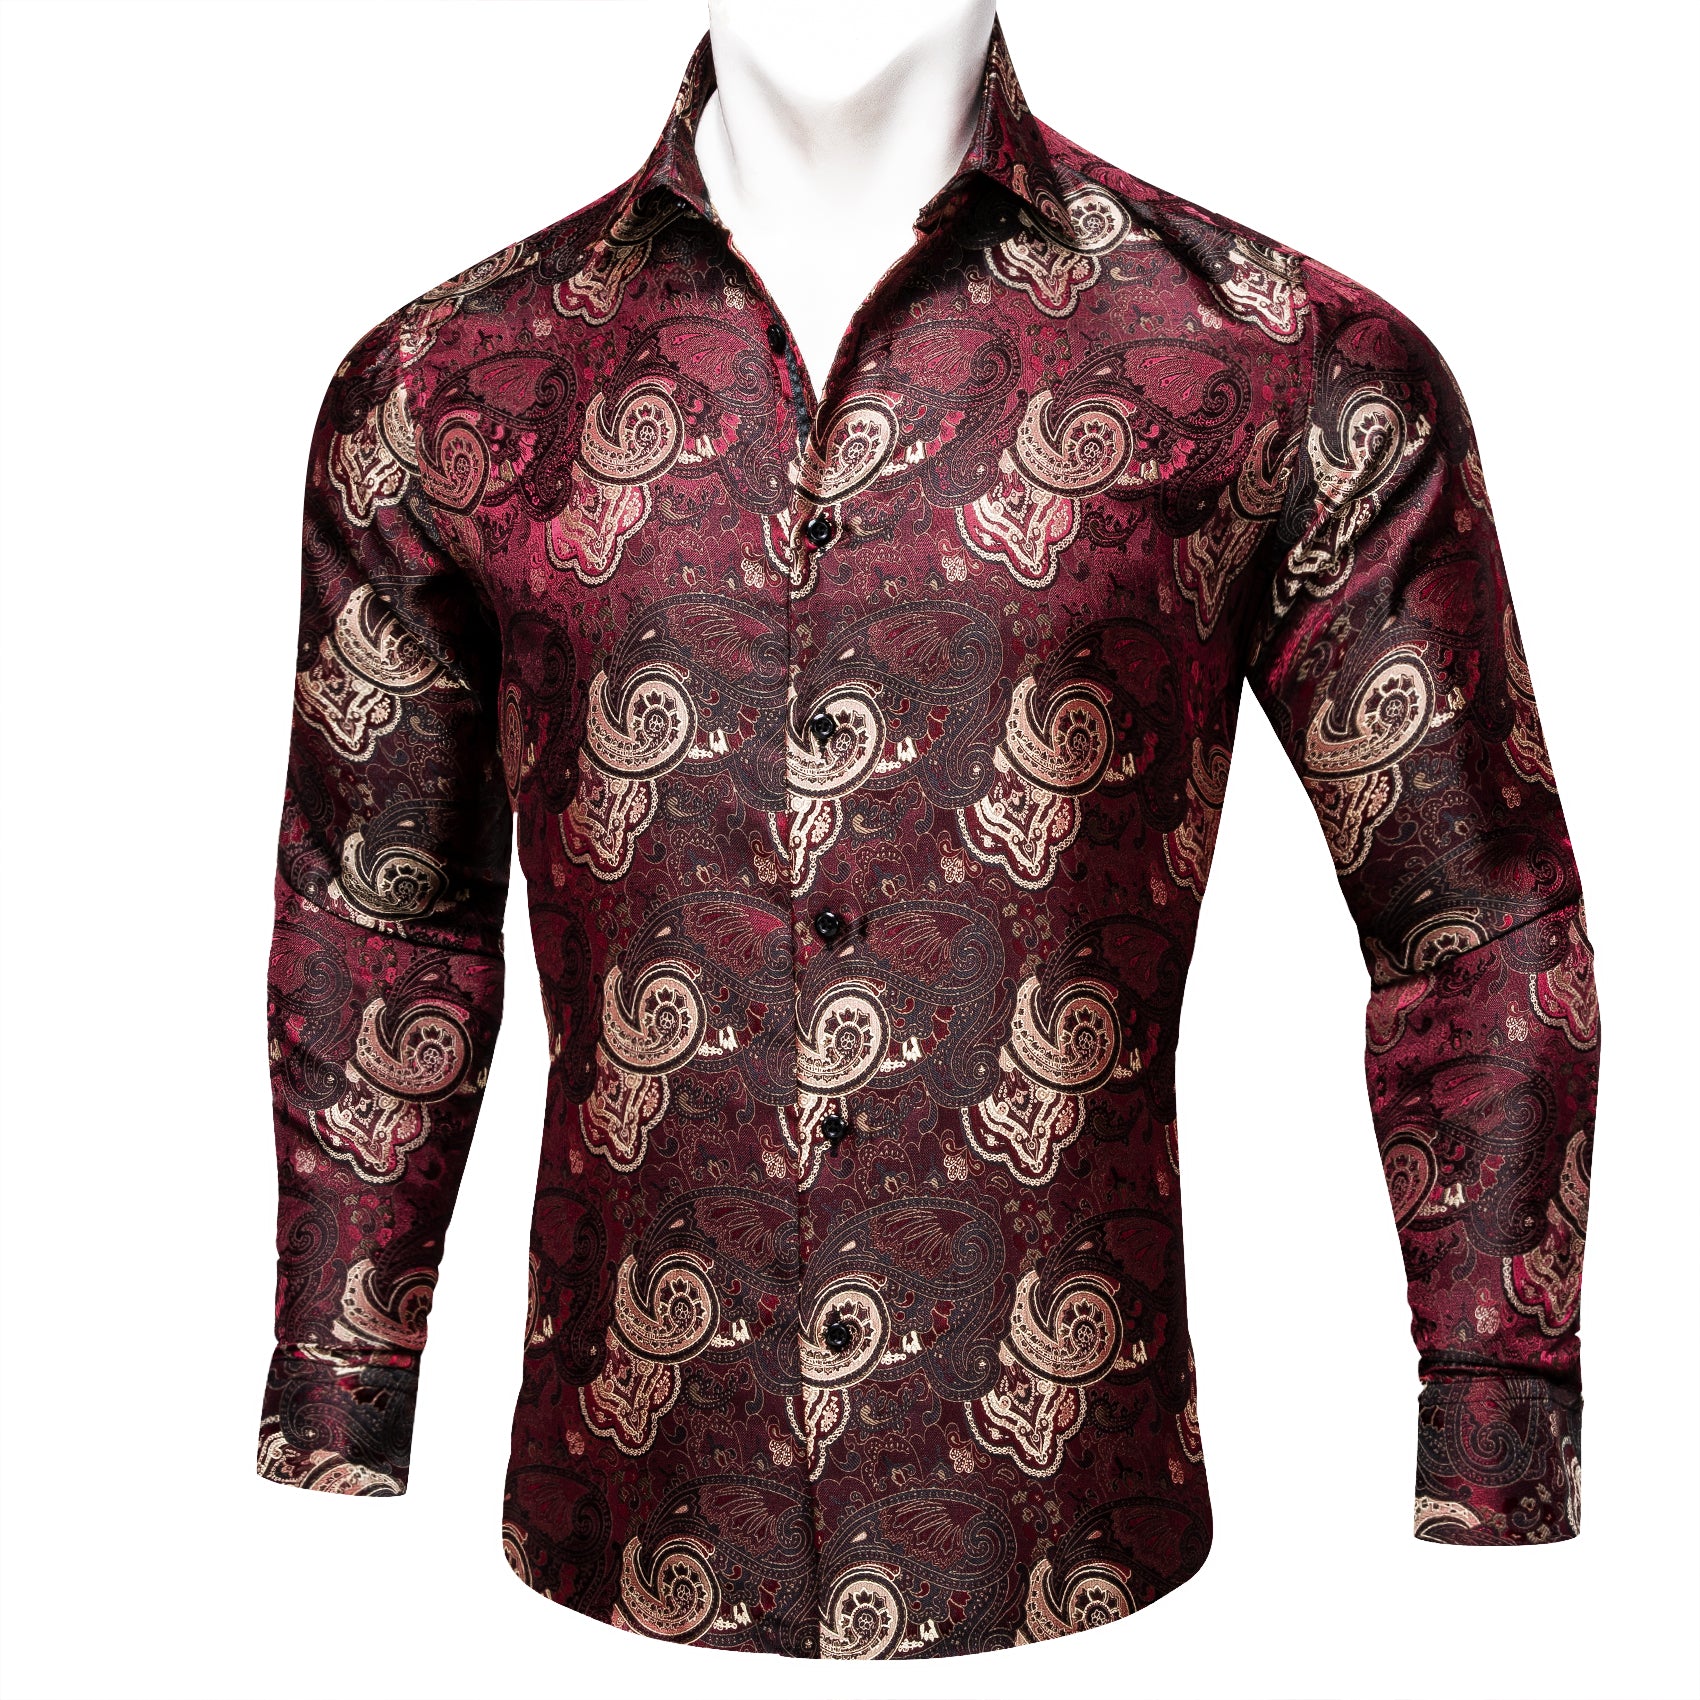 Barry.wang Red Brown Floral Shirt